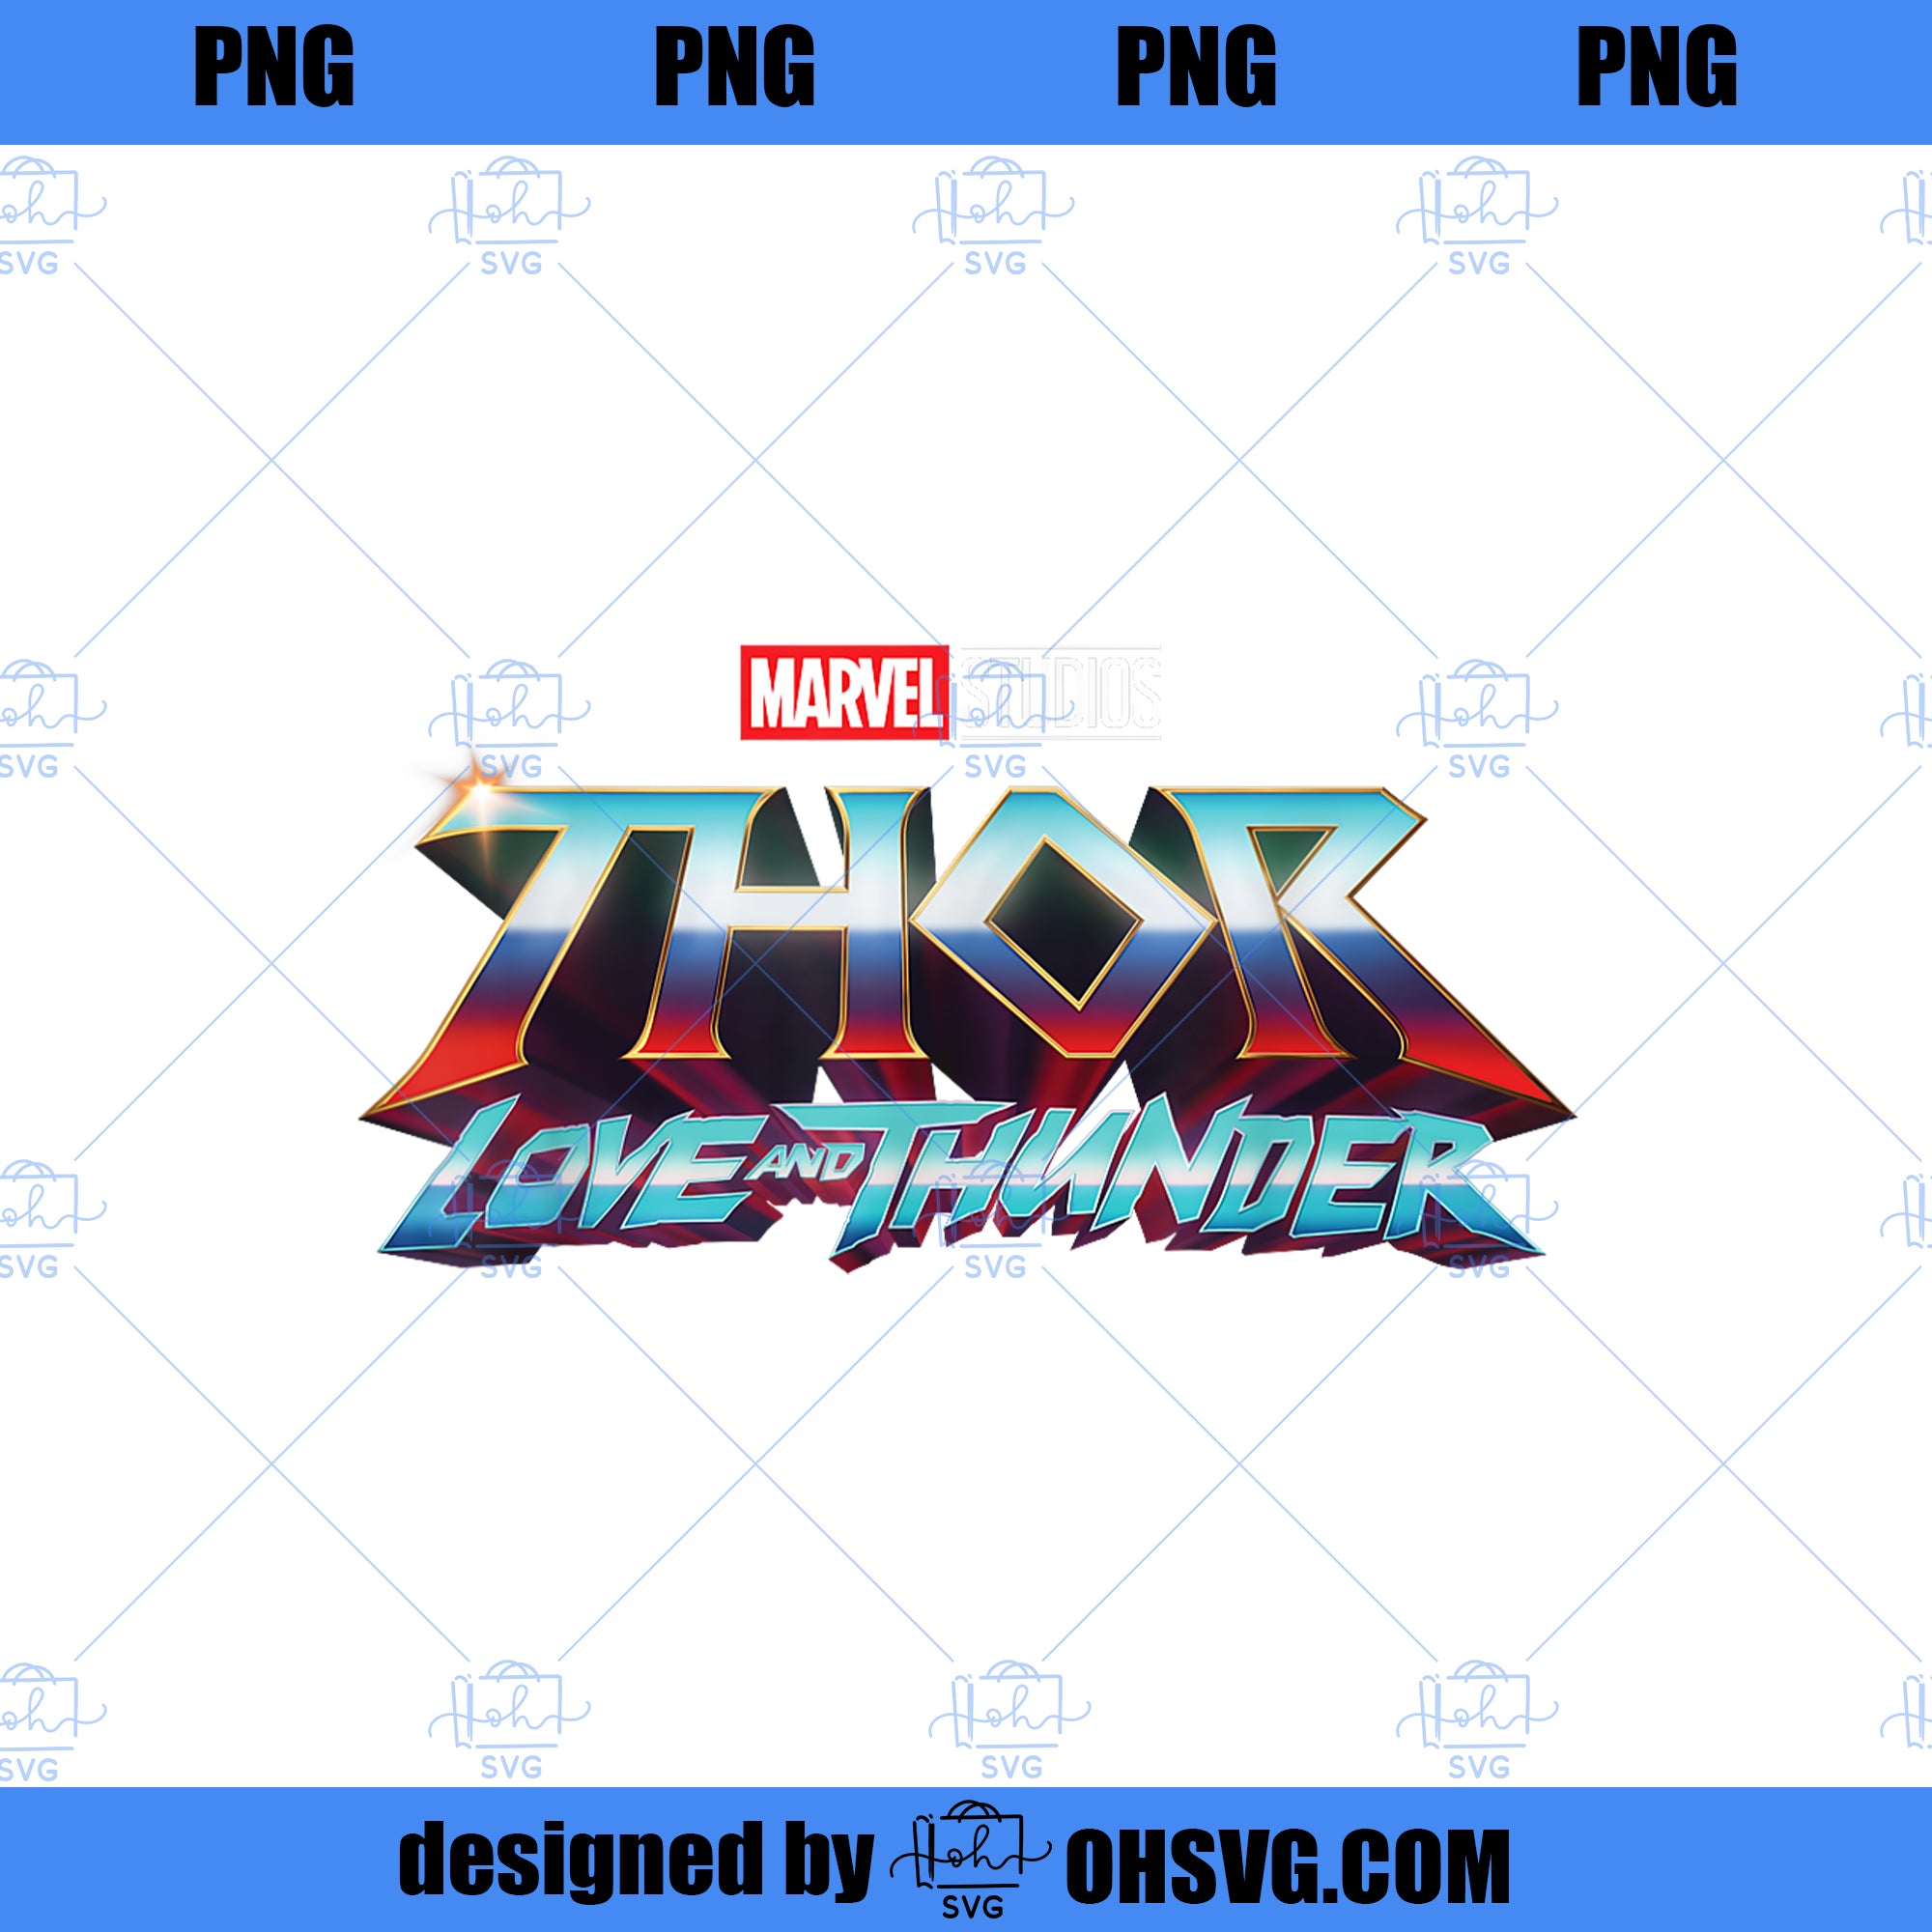 Marvel Thor Love and Thunder Movie Logo PNG, Marvel PNG, Marvel Thor PNG